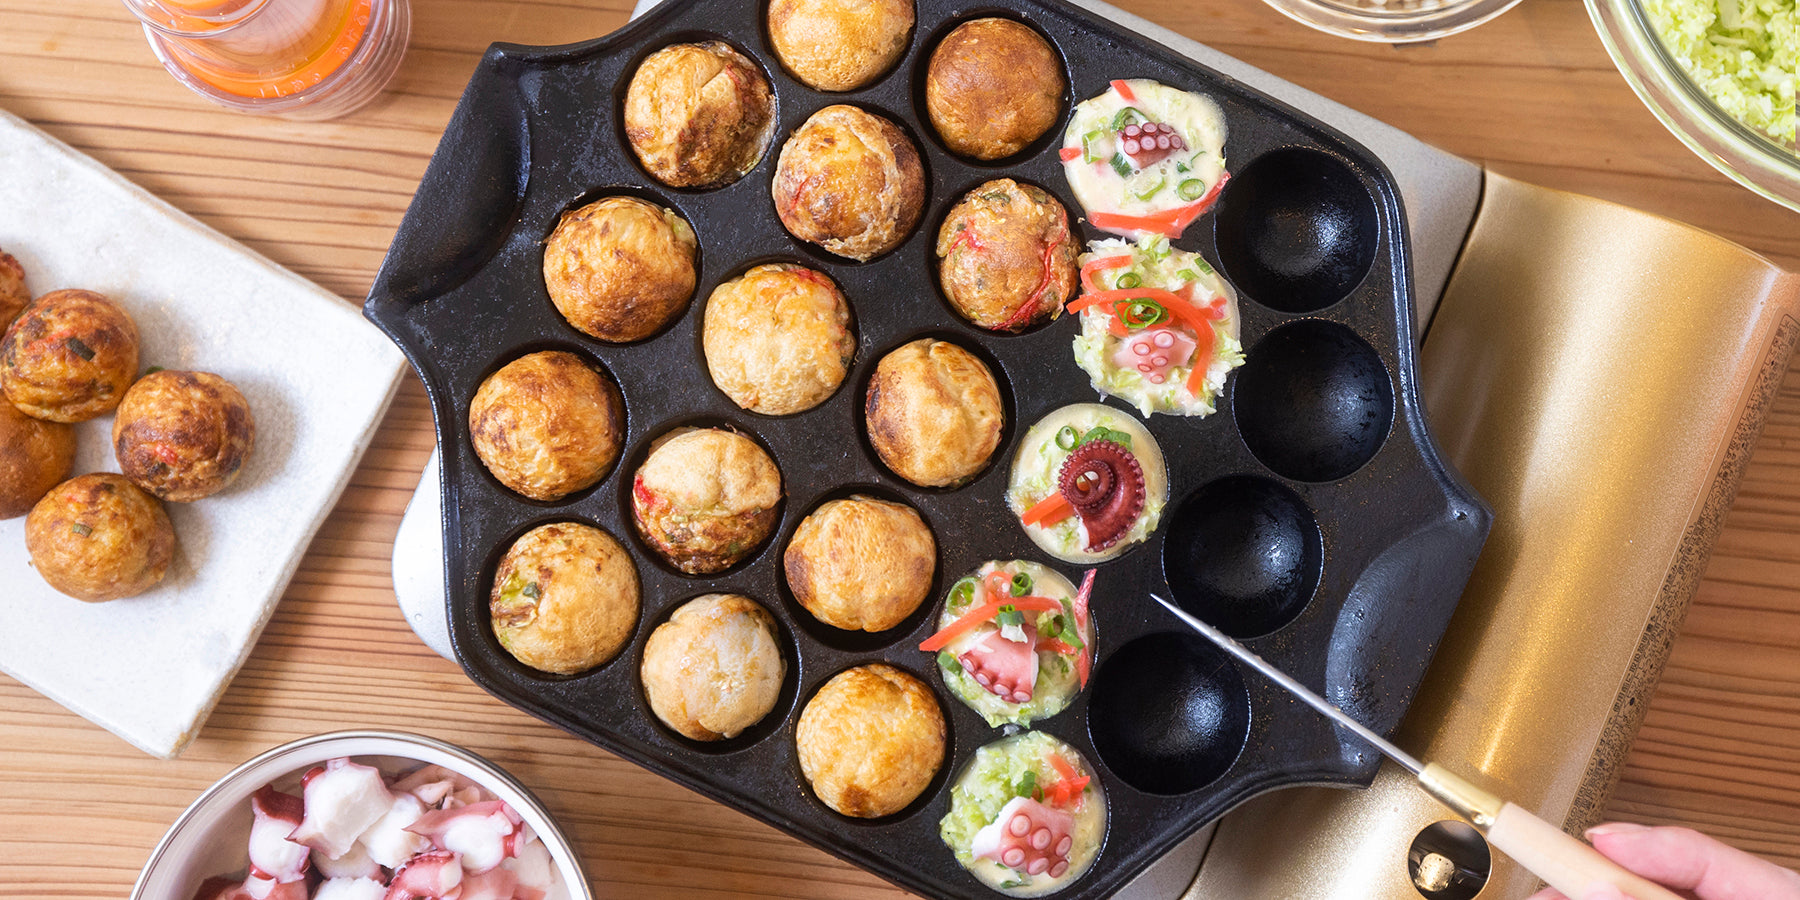 Discover our great selection of Takoyaki supplies on Globalkitchen Japan.